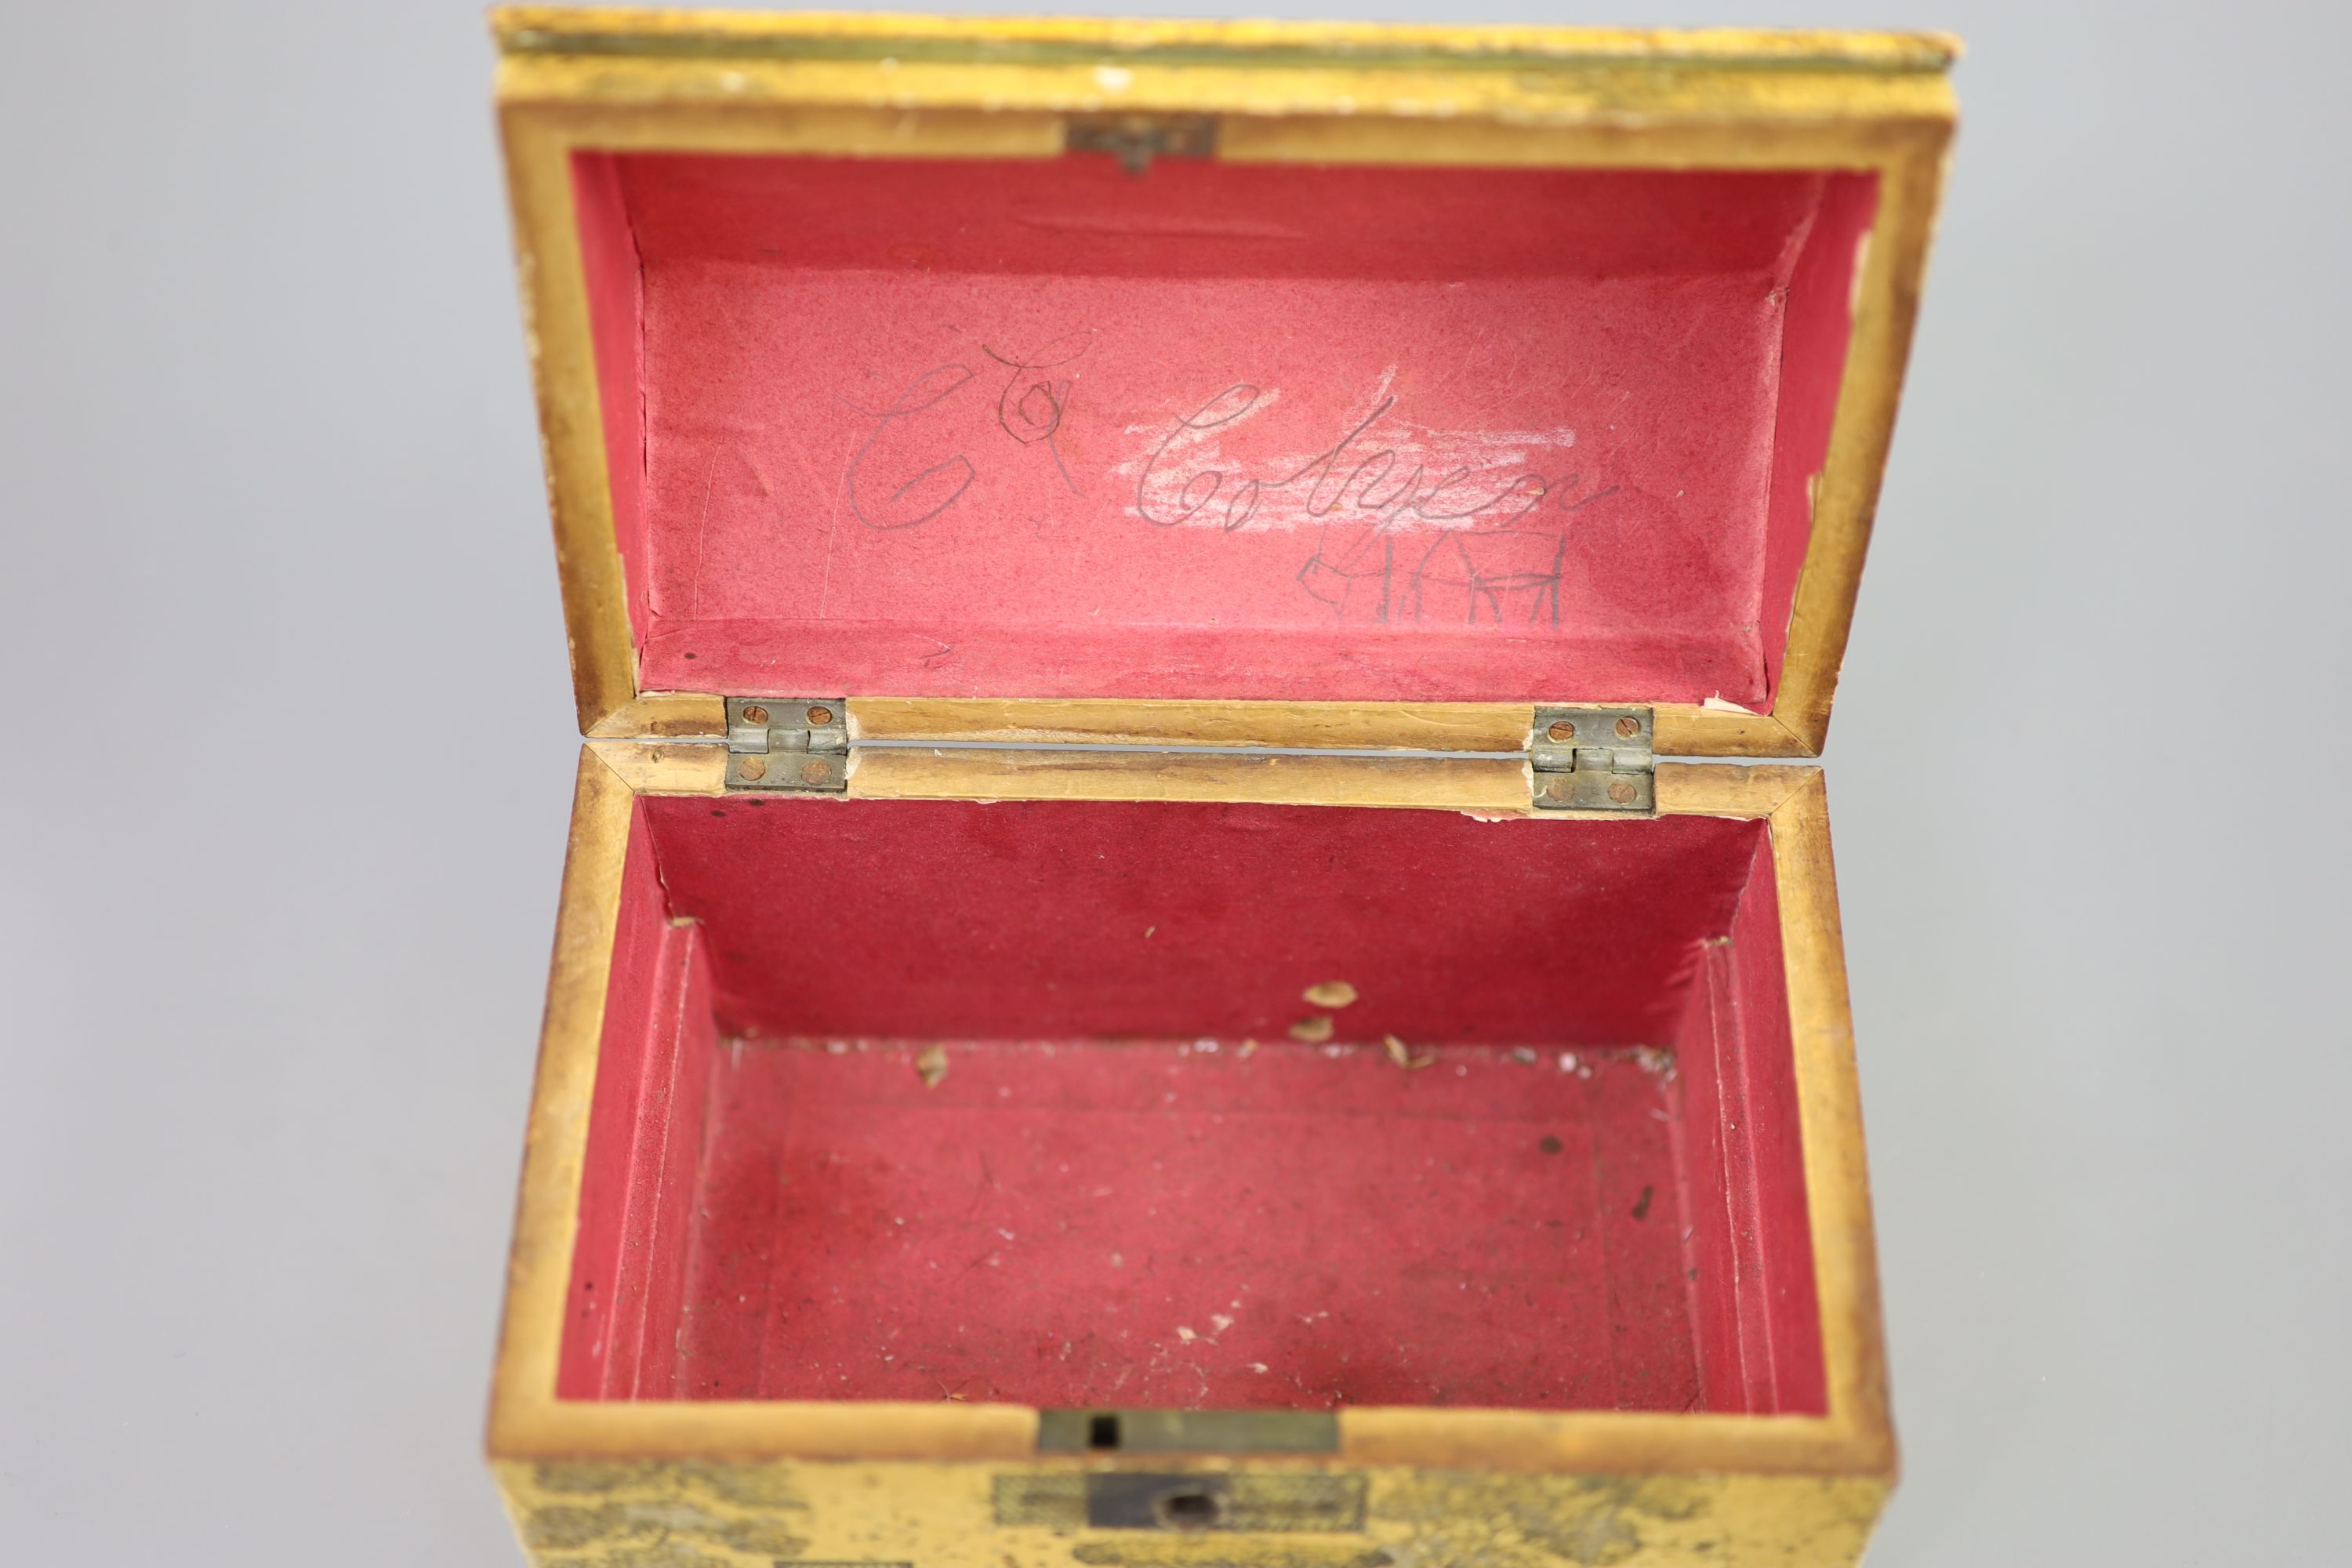 A Regency painted and penwork work box, modelled as a cottage, width 7.25in. depth 4.5in. height 5in.